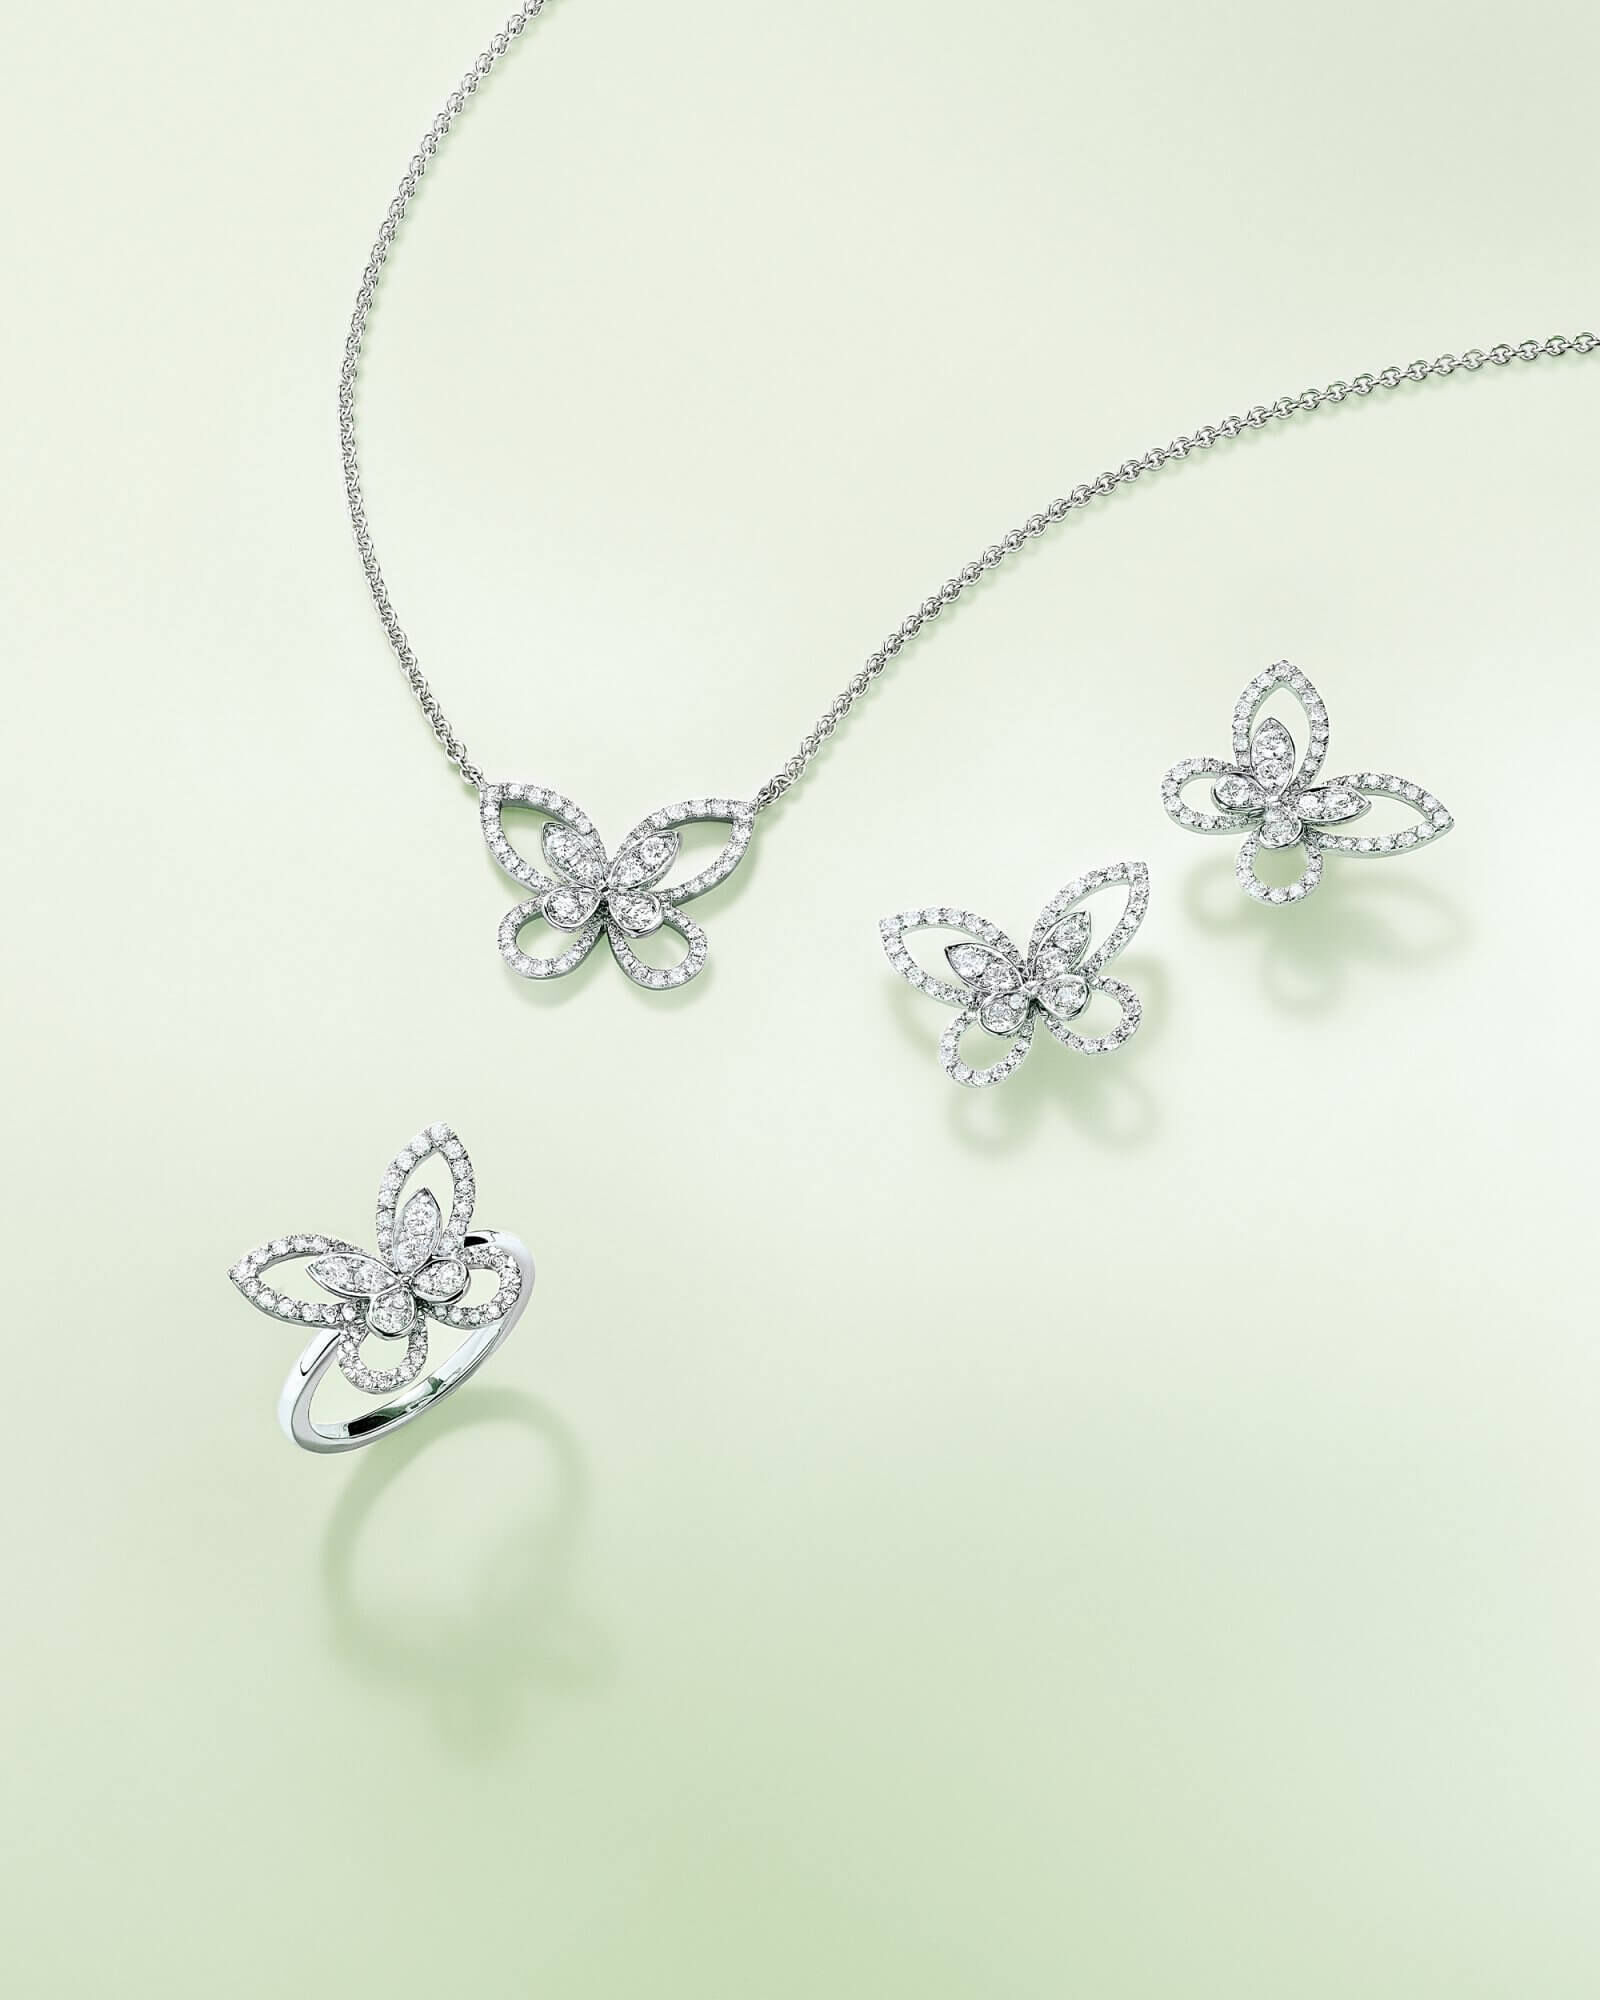 The Graff Butterfly Silhouette colleciton diamond ring, earrings and pendant